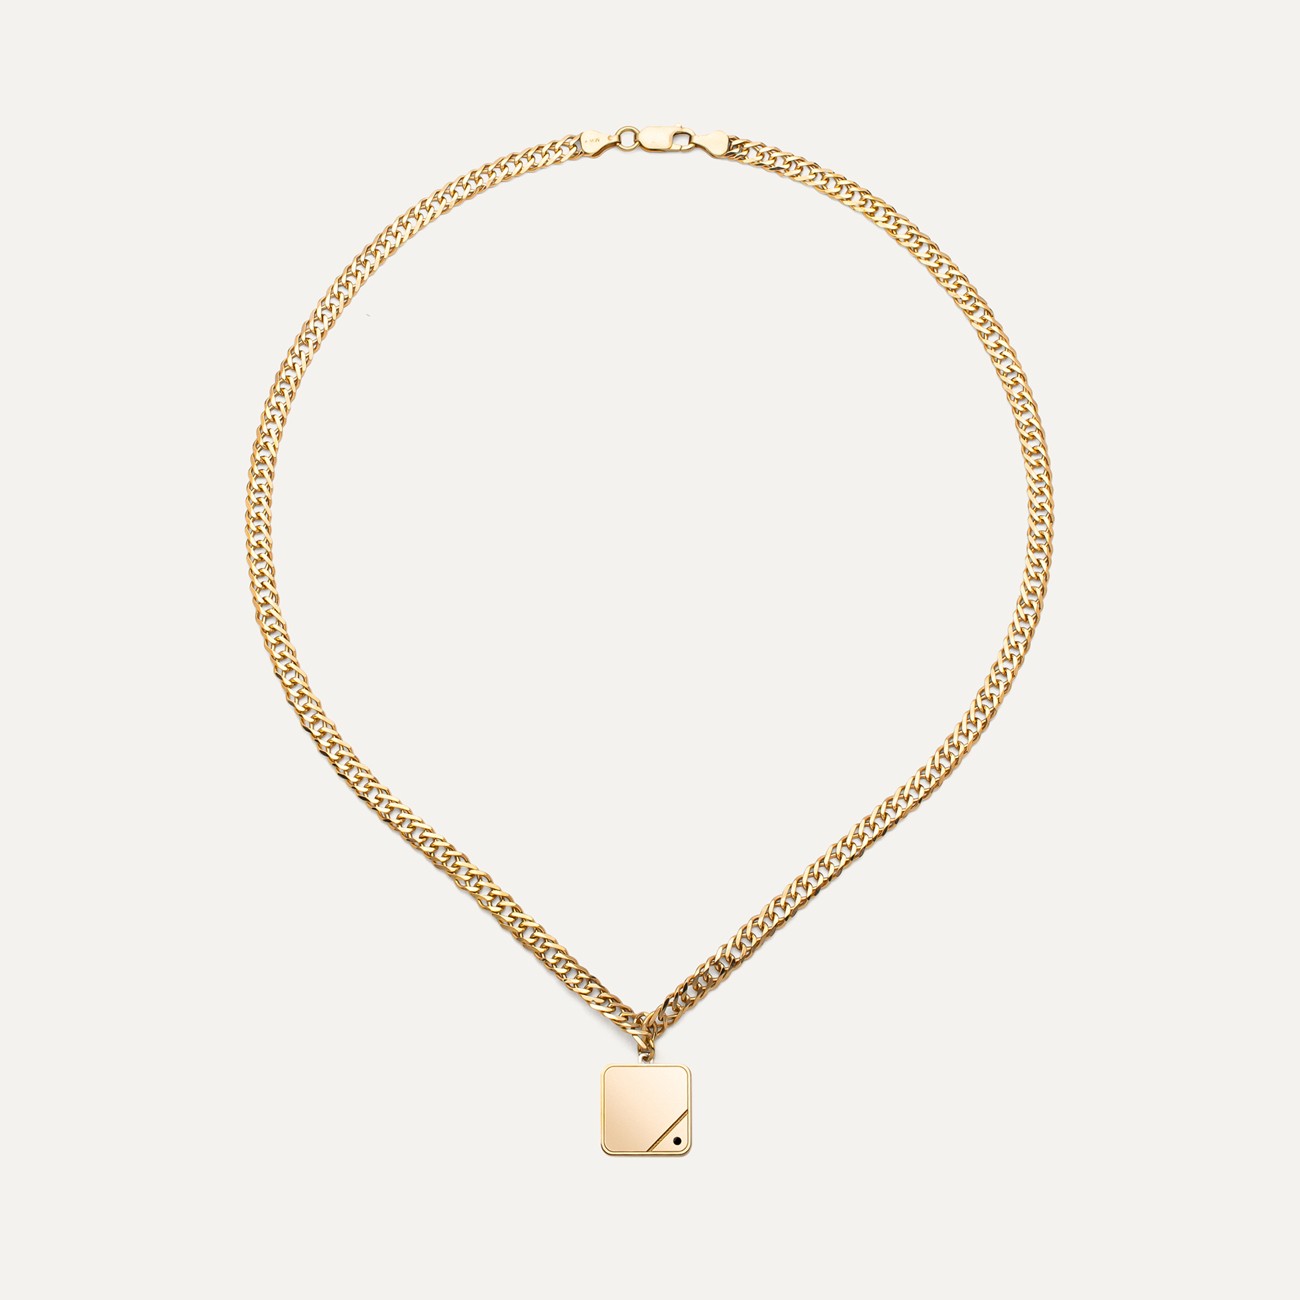 Rectangle pendant with cystal necklace rombo chain 925